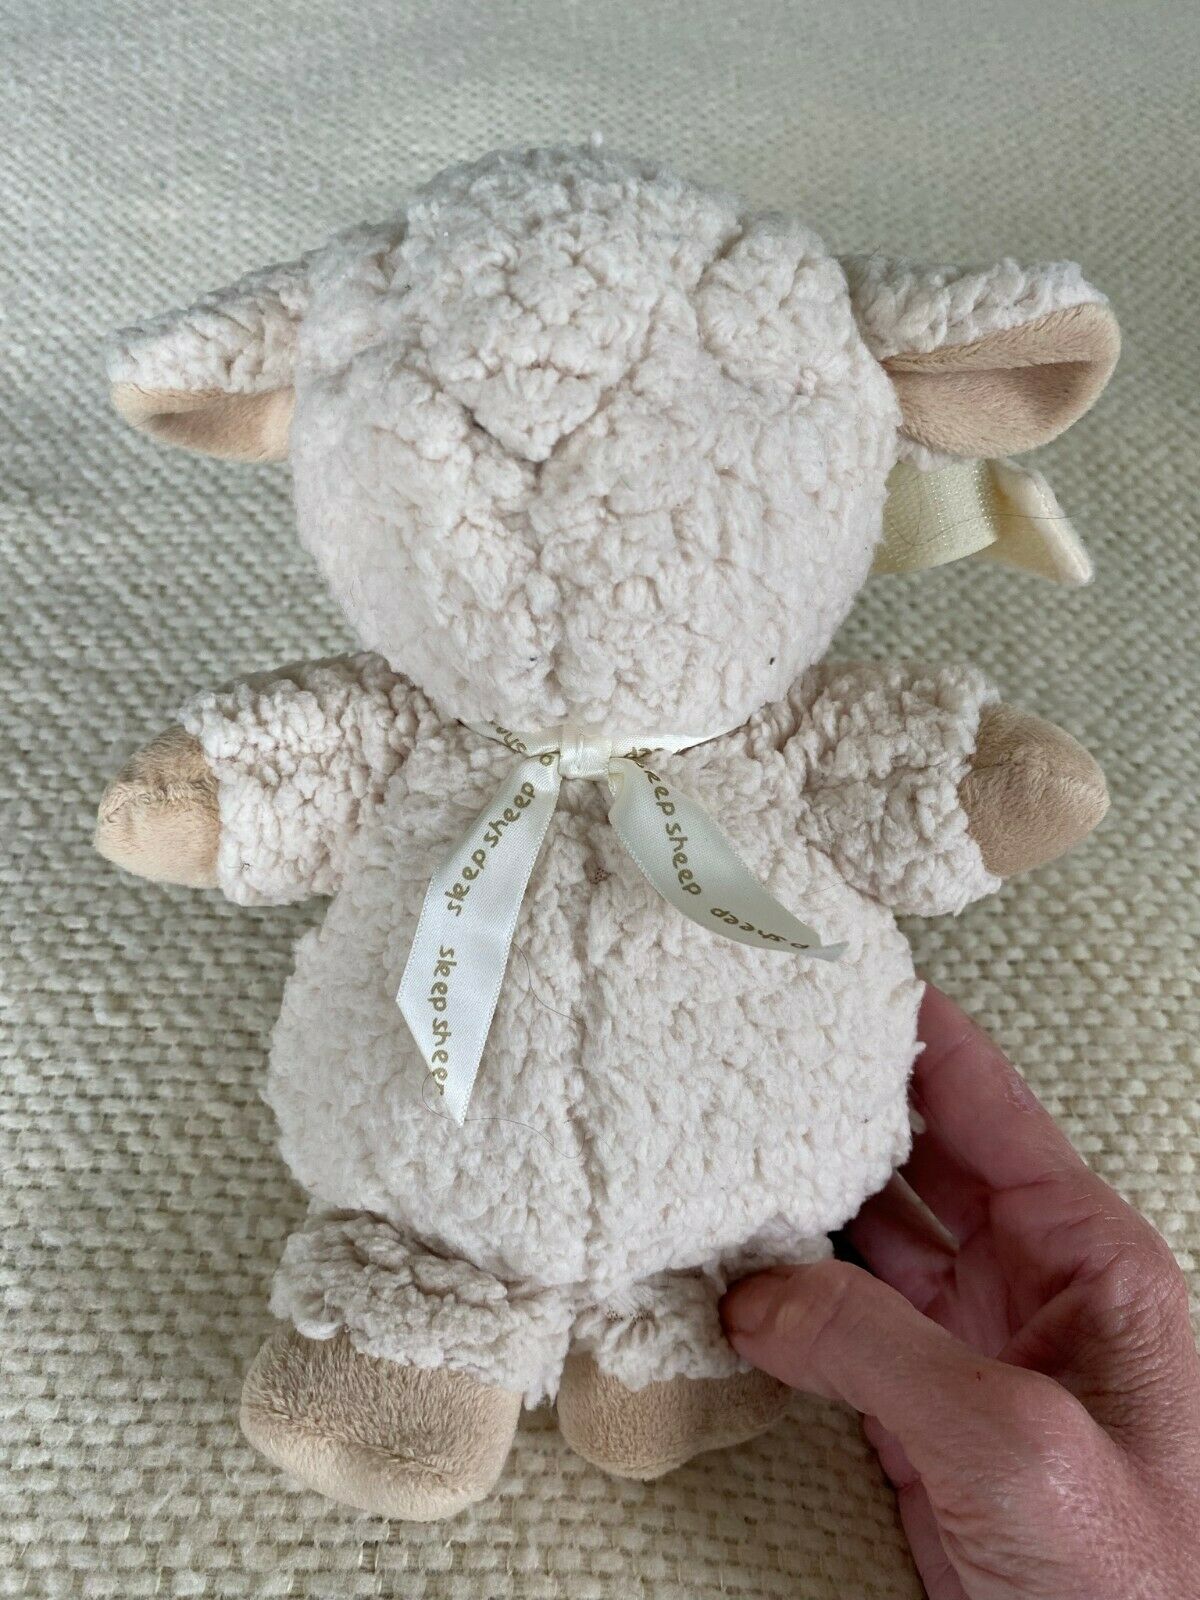 Cloud B Sleep Lamb Sound Machine Soother Baby 4 Sounds Timer Plush